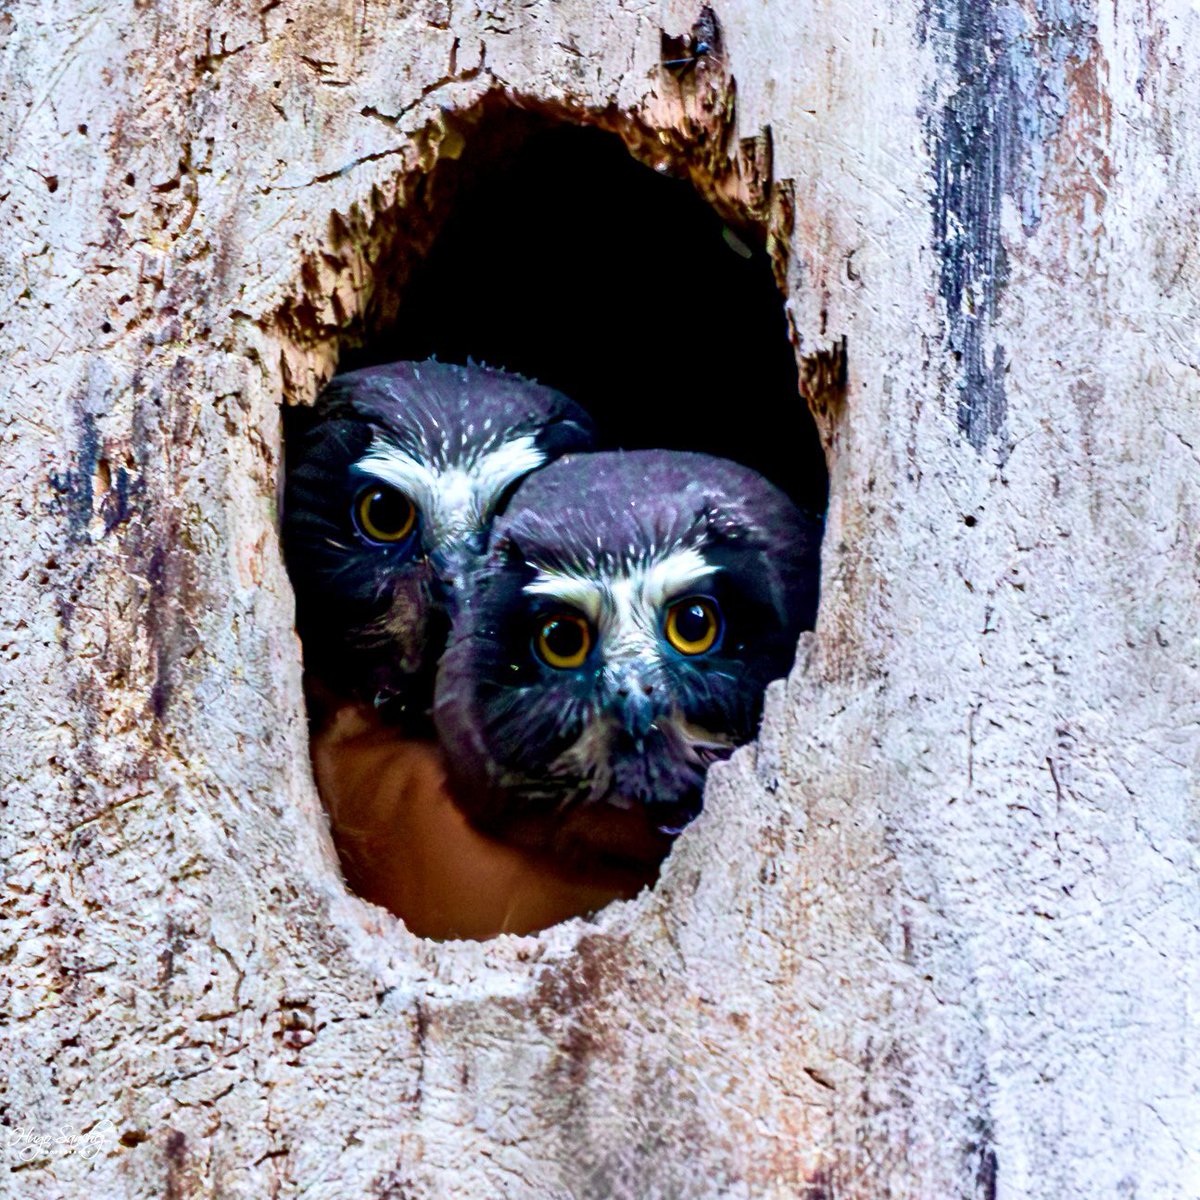 Can you explain adorable 🥰hold on.here it is ❤️. #owl #sawwhetowl #nature #naturephotography #sawwhetowlets #canada #owlet #forest #alberta #photography #wildlife #cute